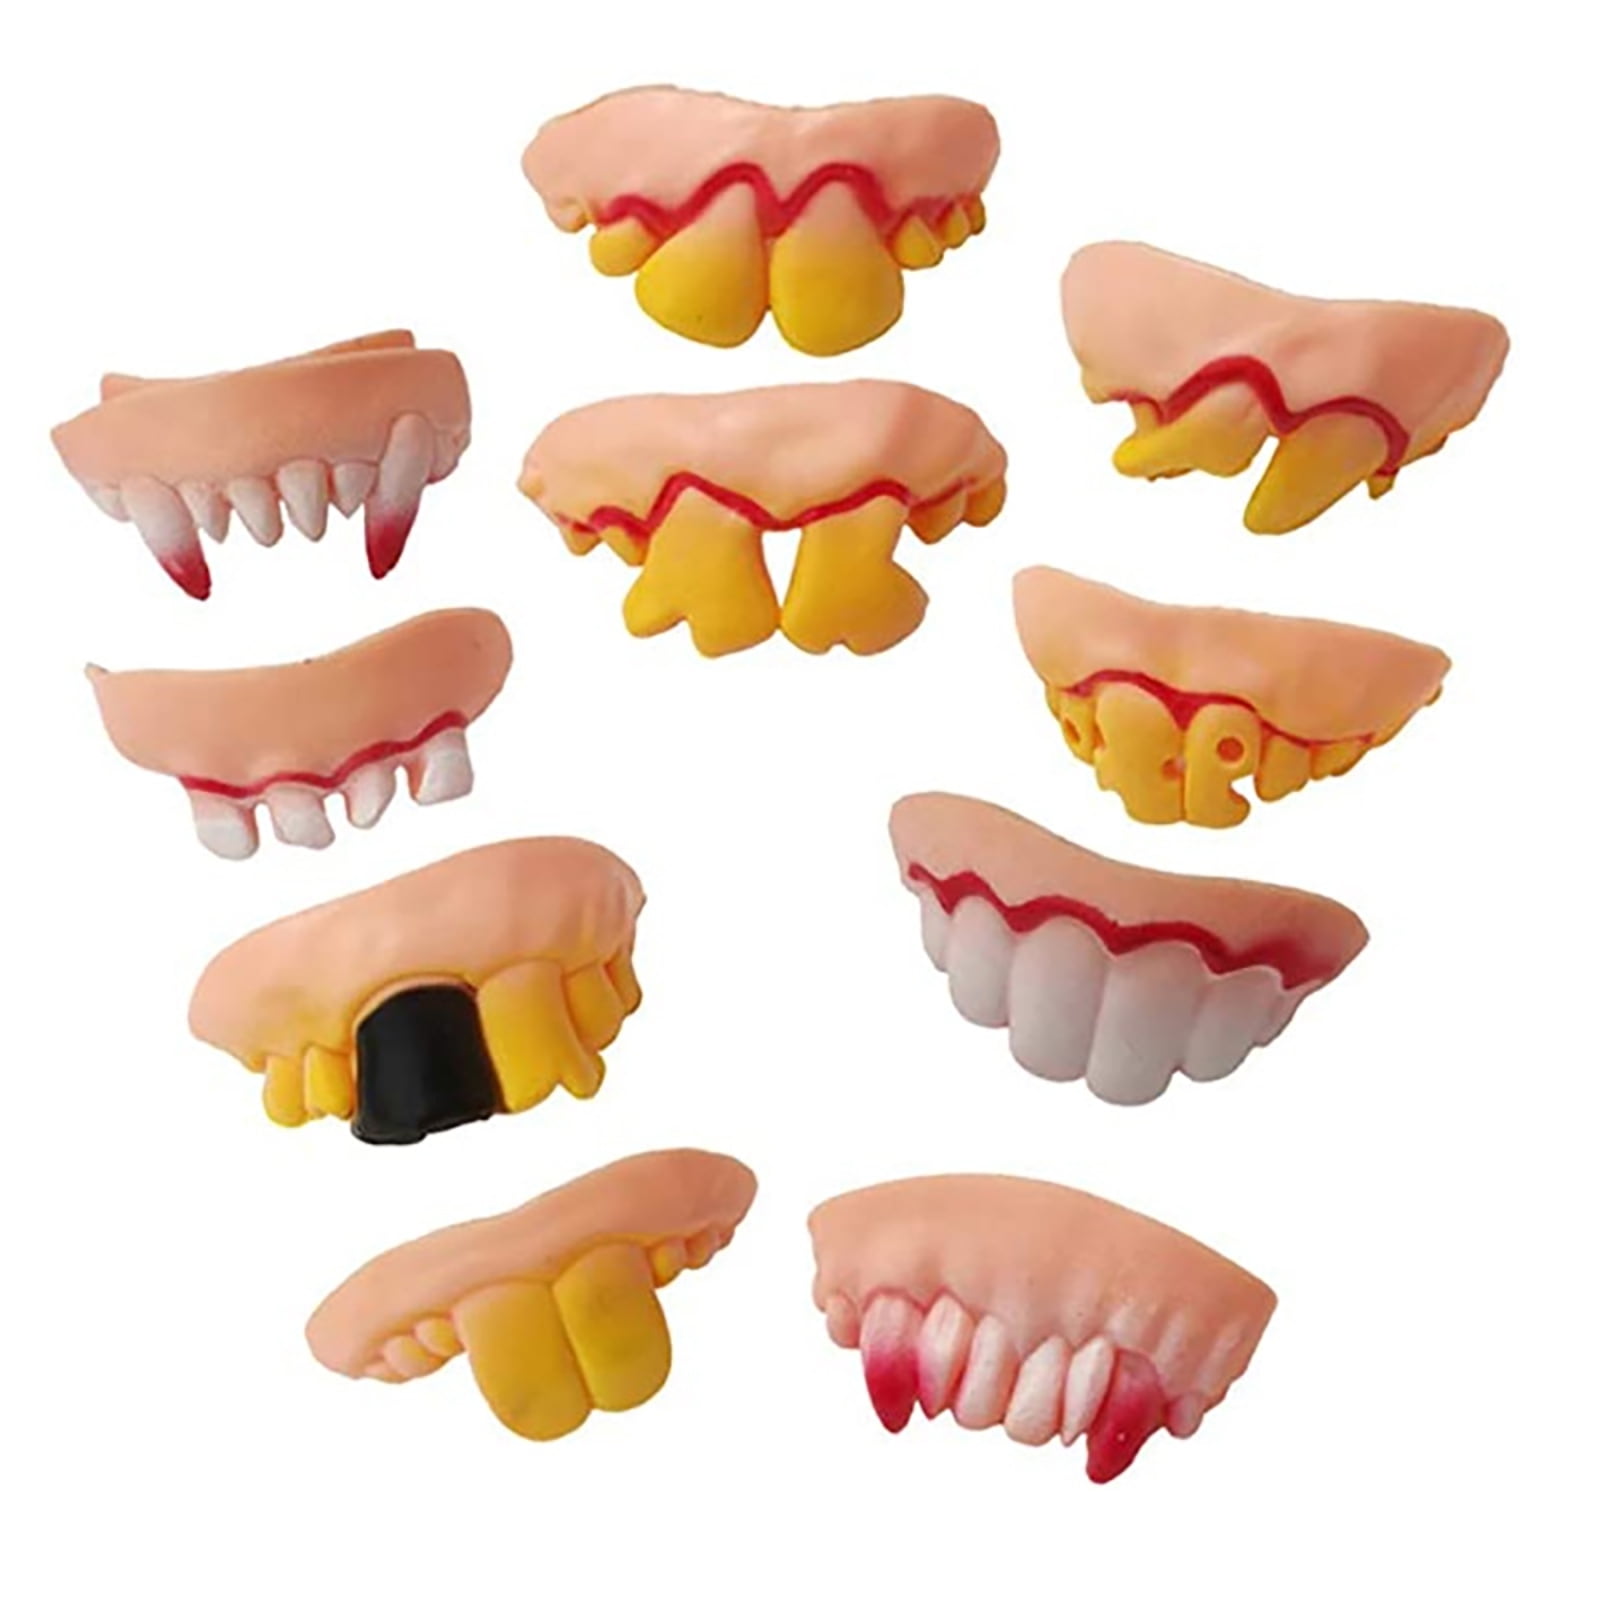 CiCy 12 Pcs Funny Teeth Ugly Fake Teeth Prank Toy Plastic Troubled Teeth Costume Party Funny Halloween Gag for Halloween Christmas Decoration